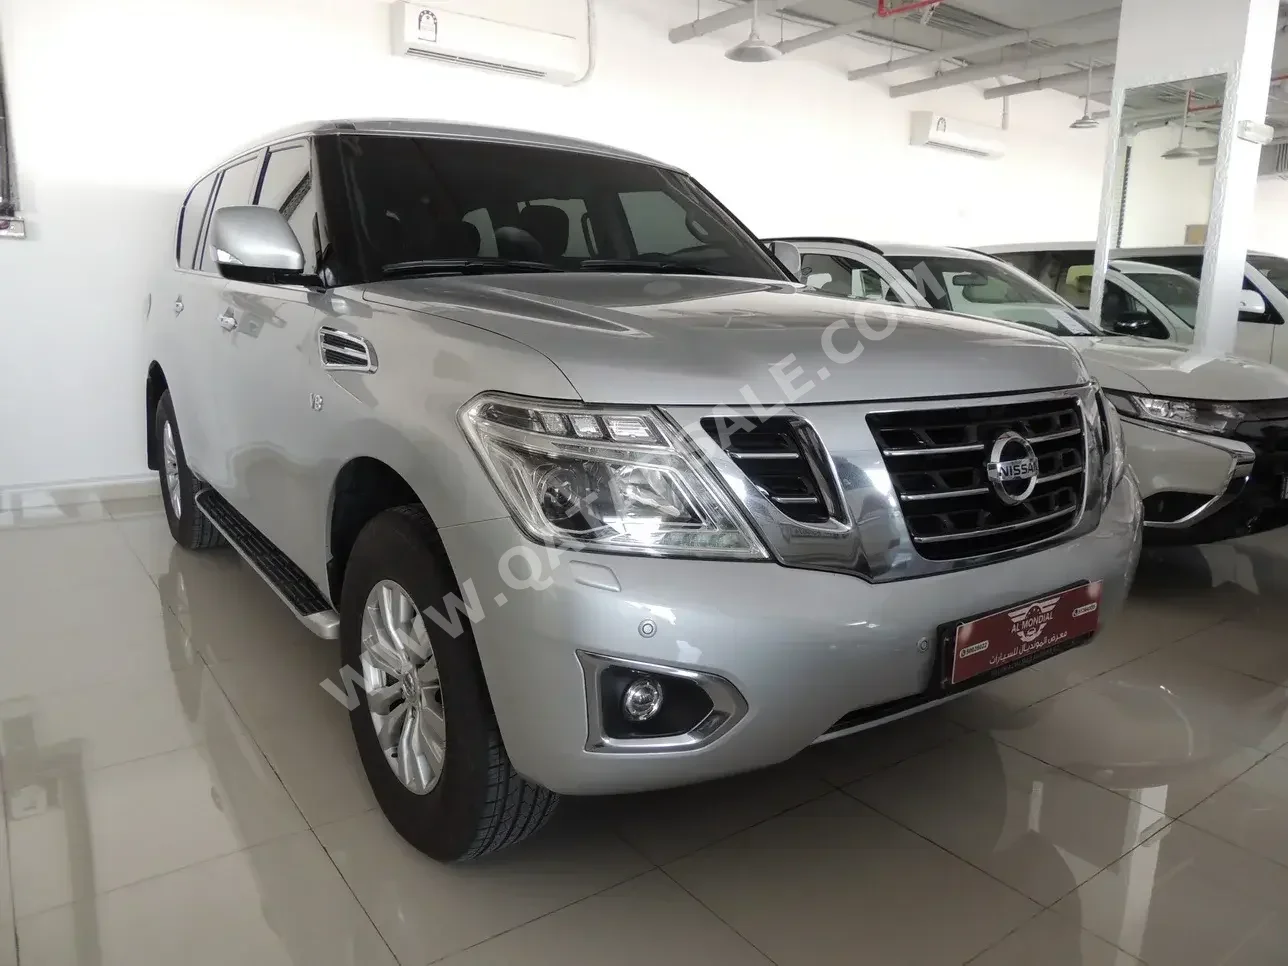 Nissan  Patrol  XE  2016  Automatic  288,000 Km  6 Cylinder  Four Wheel Drive (4WD)  SUV  Silver